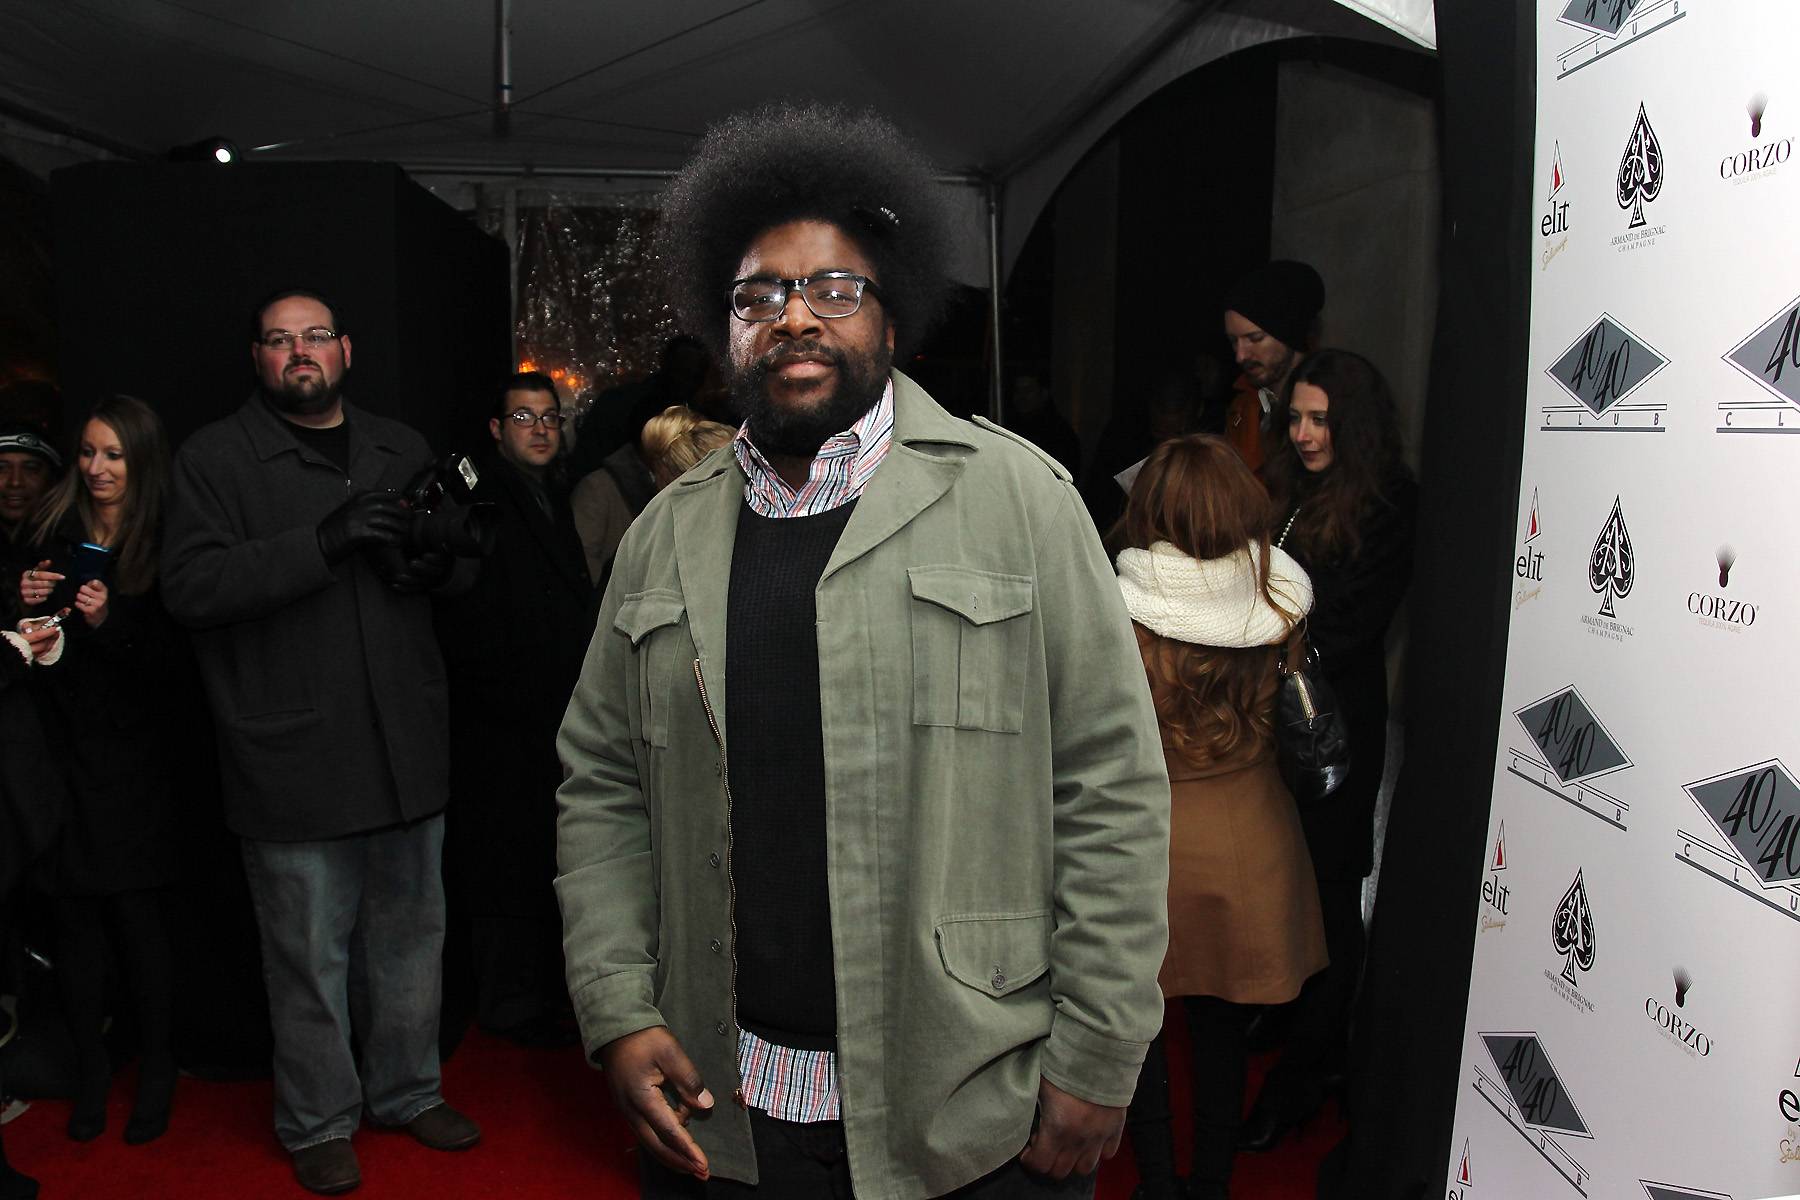 Questlove  - The Roots drummer arrived in a preppy sweater and button-up combo and spectacles. He Tweeted hilarious updates while waiting in a long line to recover his coat at the end of the night, including, “Ok, I think I'm watching the Real Housewives of 40/40's coat check room. 6 chicks bout to take earrings off and apply Vaseline &amp; throw down.” Yikes!   (Photo: Neilson Barnard/Getty Images)